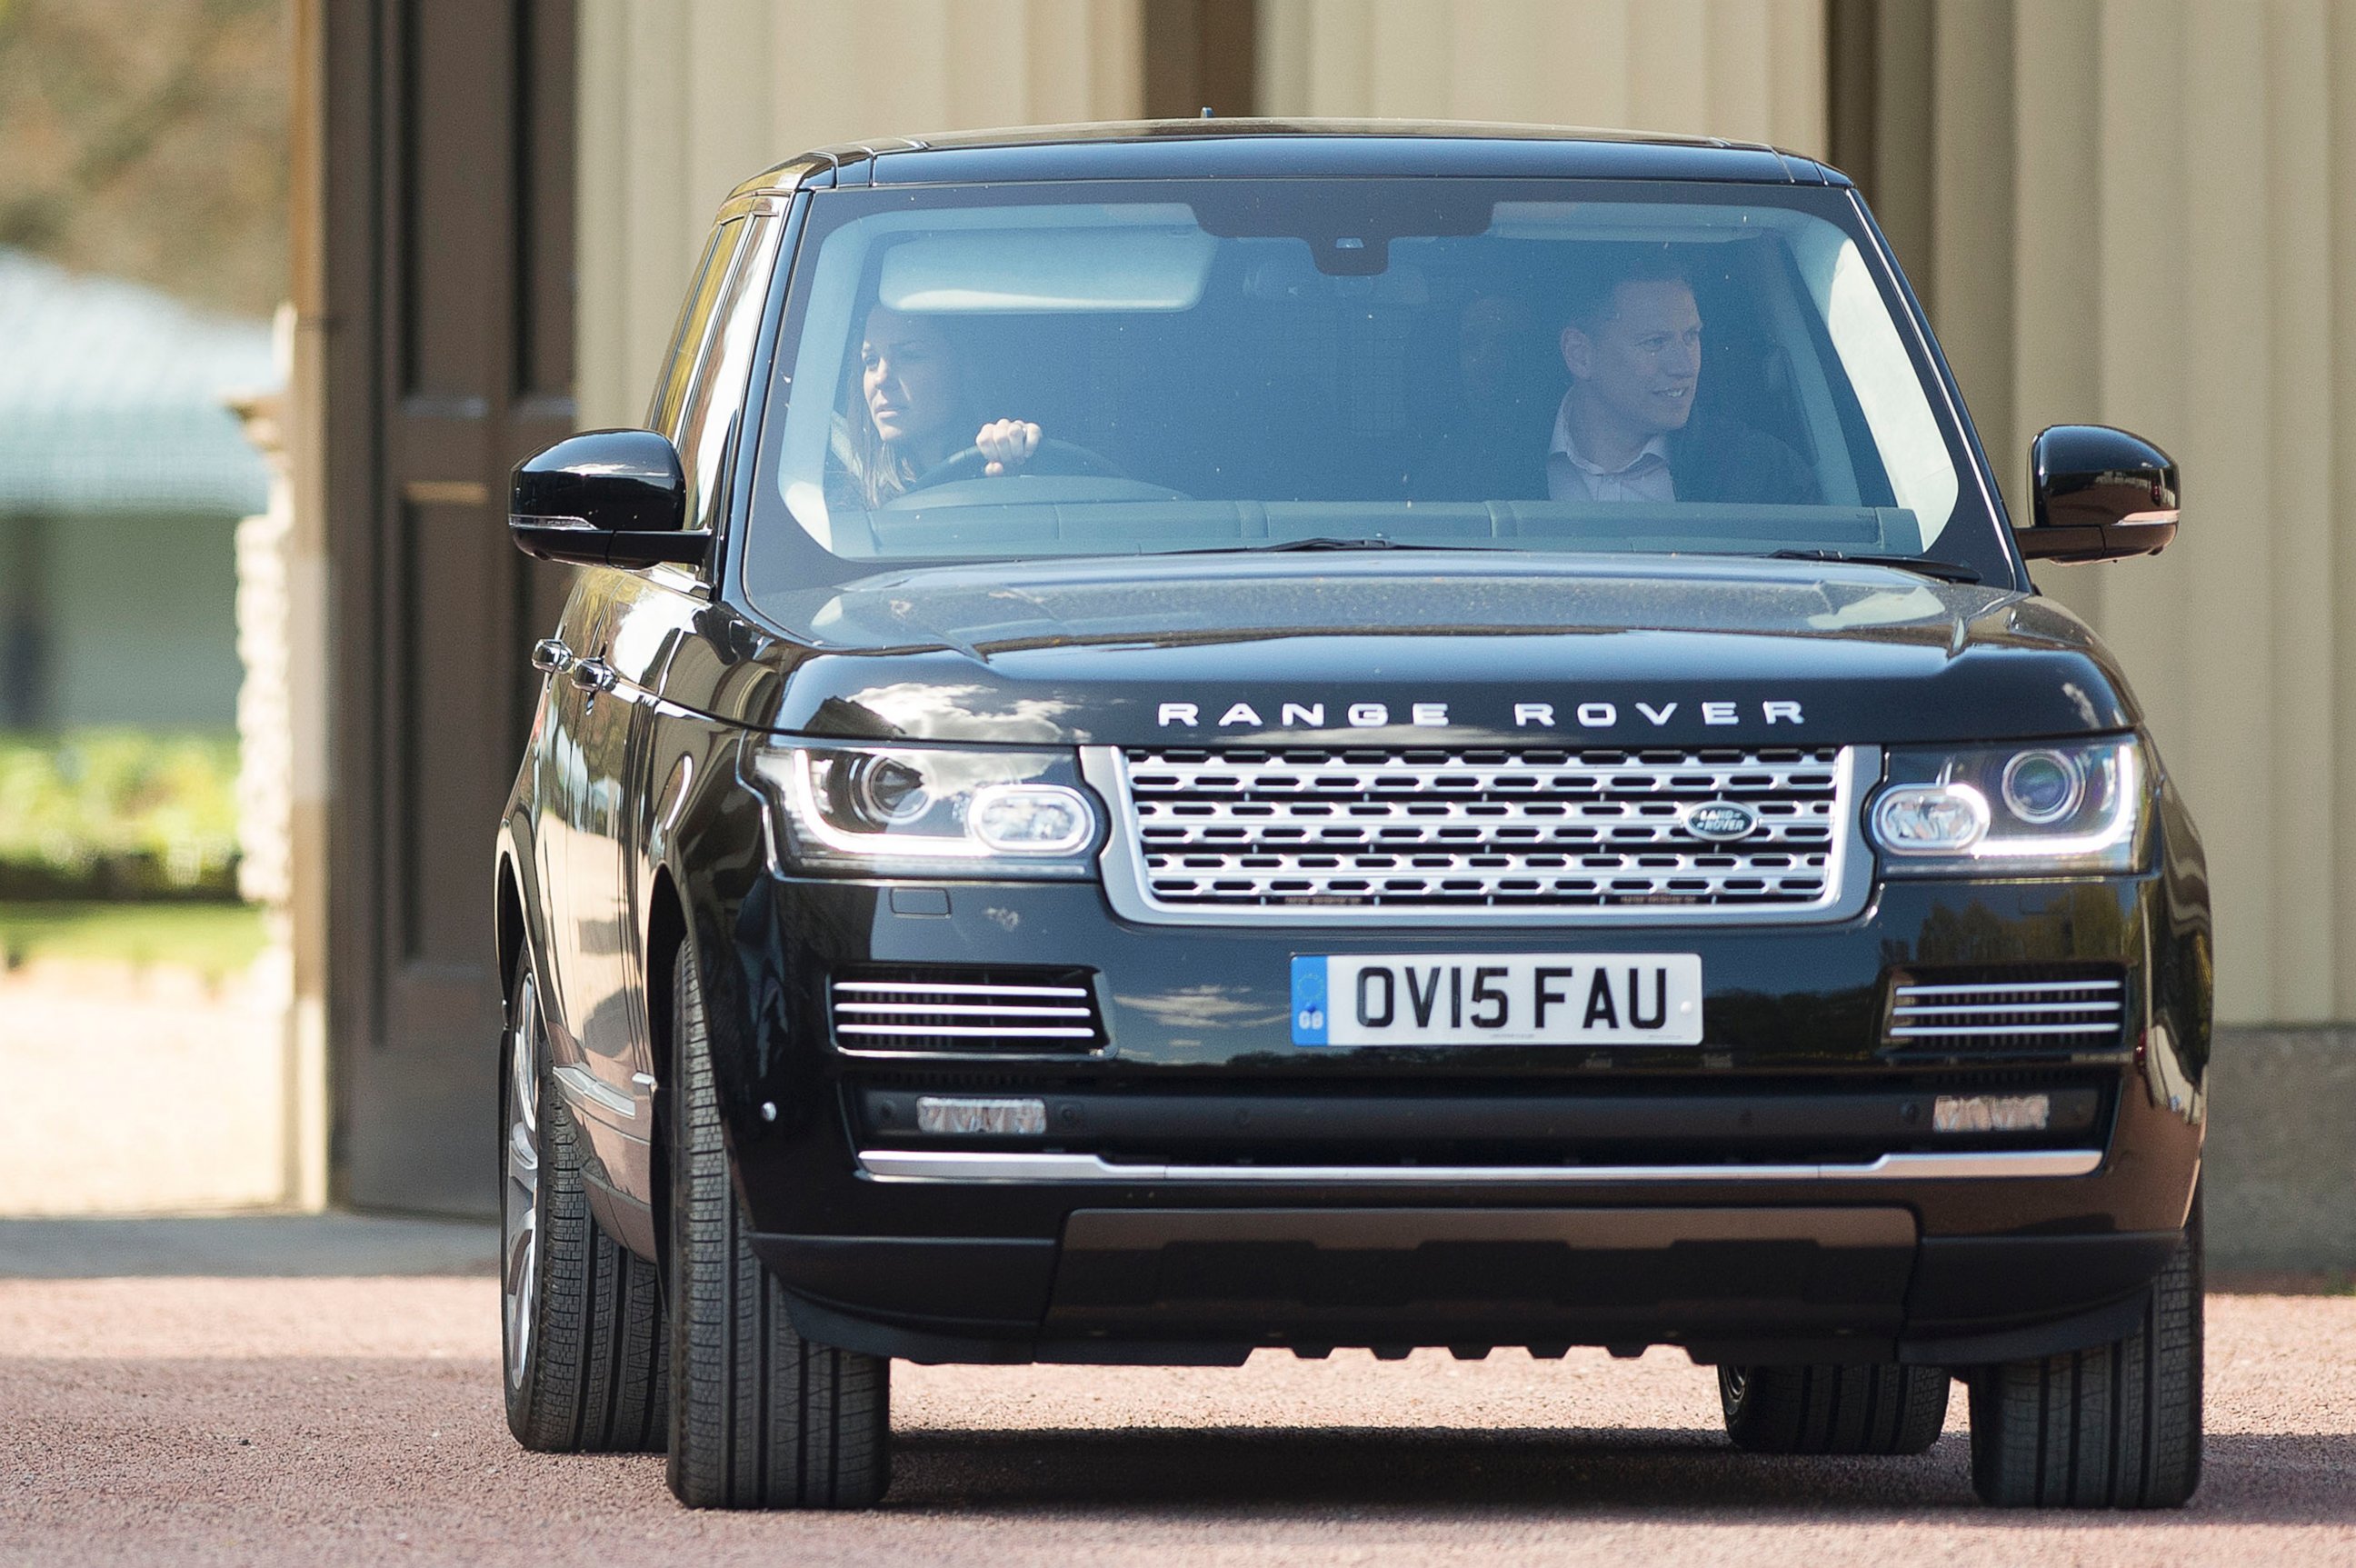 PHOTO: Kate Middleton is spotted driving a Range Rover out of Buckingham Palace in London on April 28, 2015.
